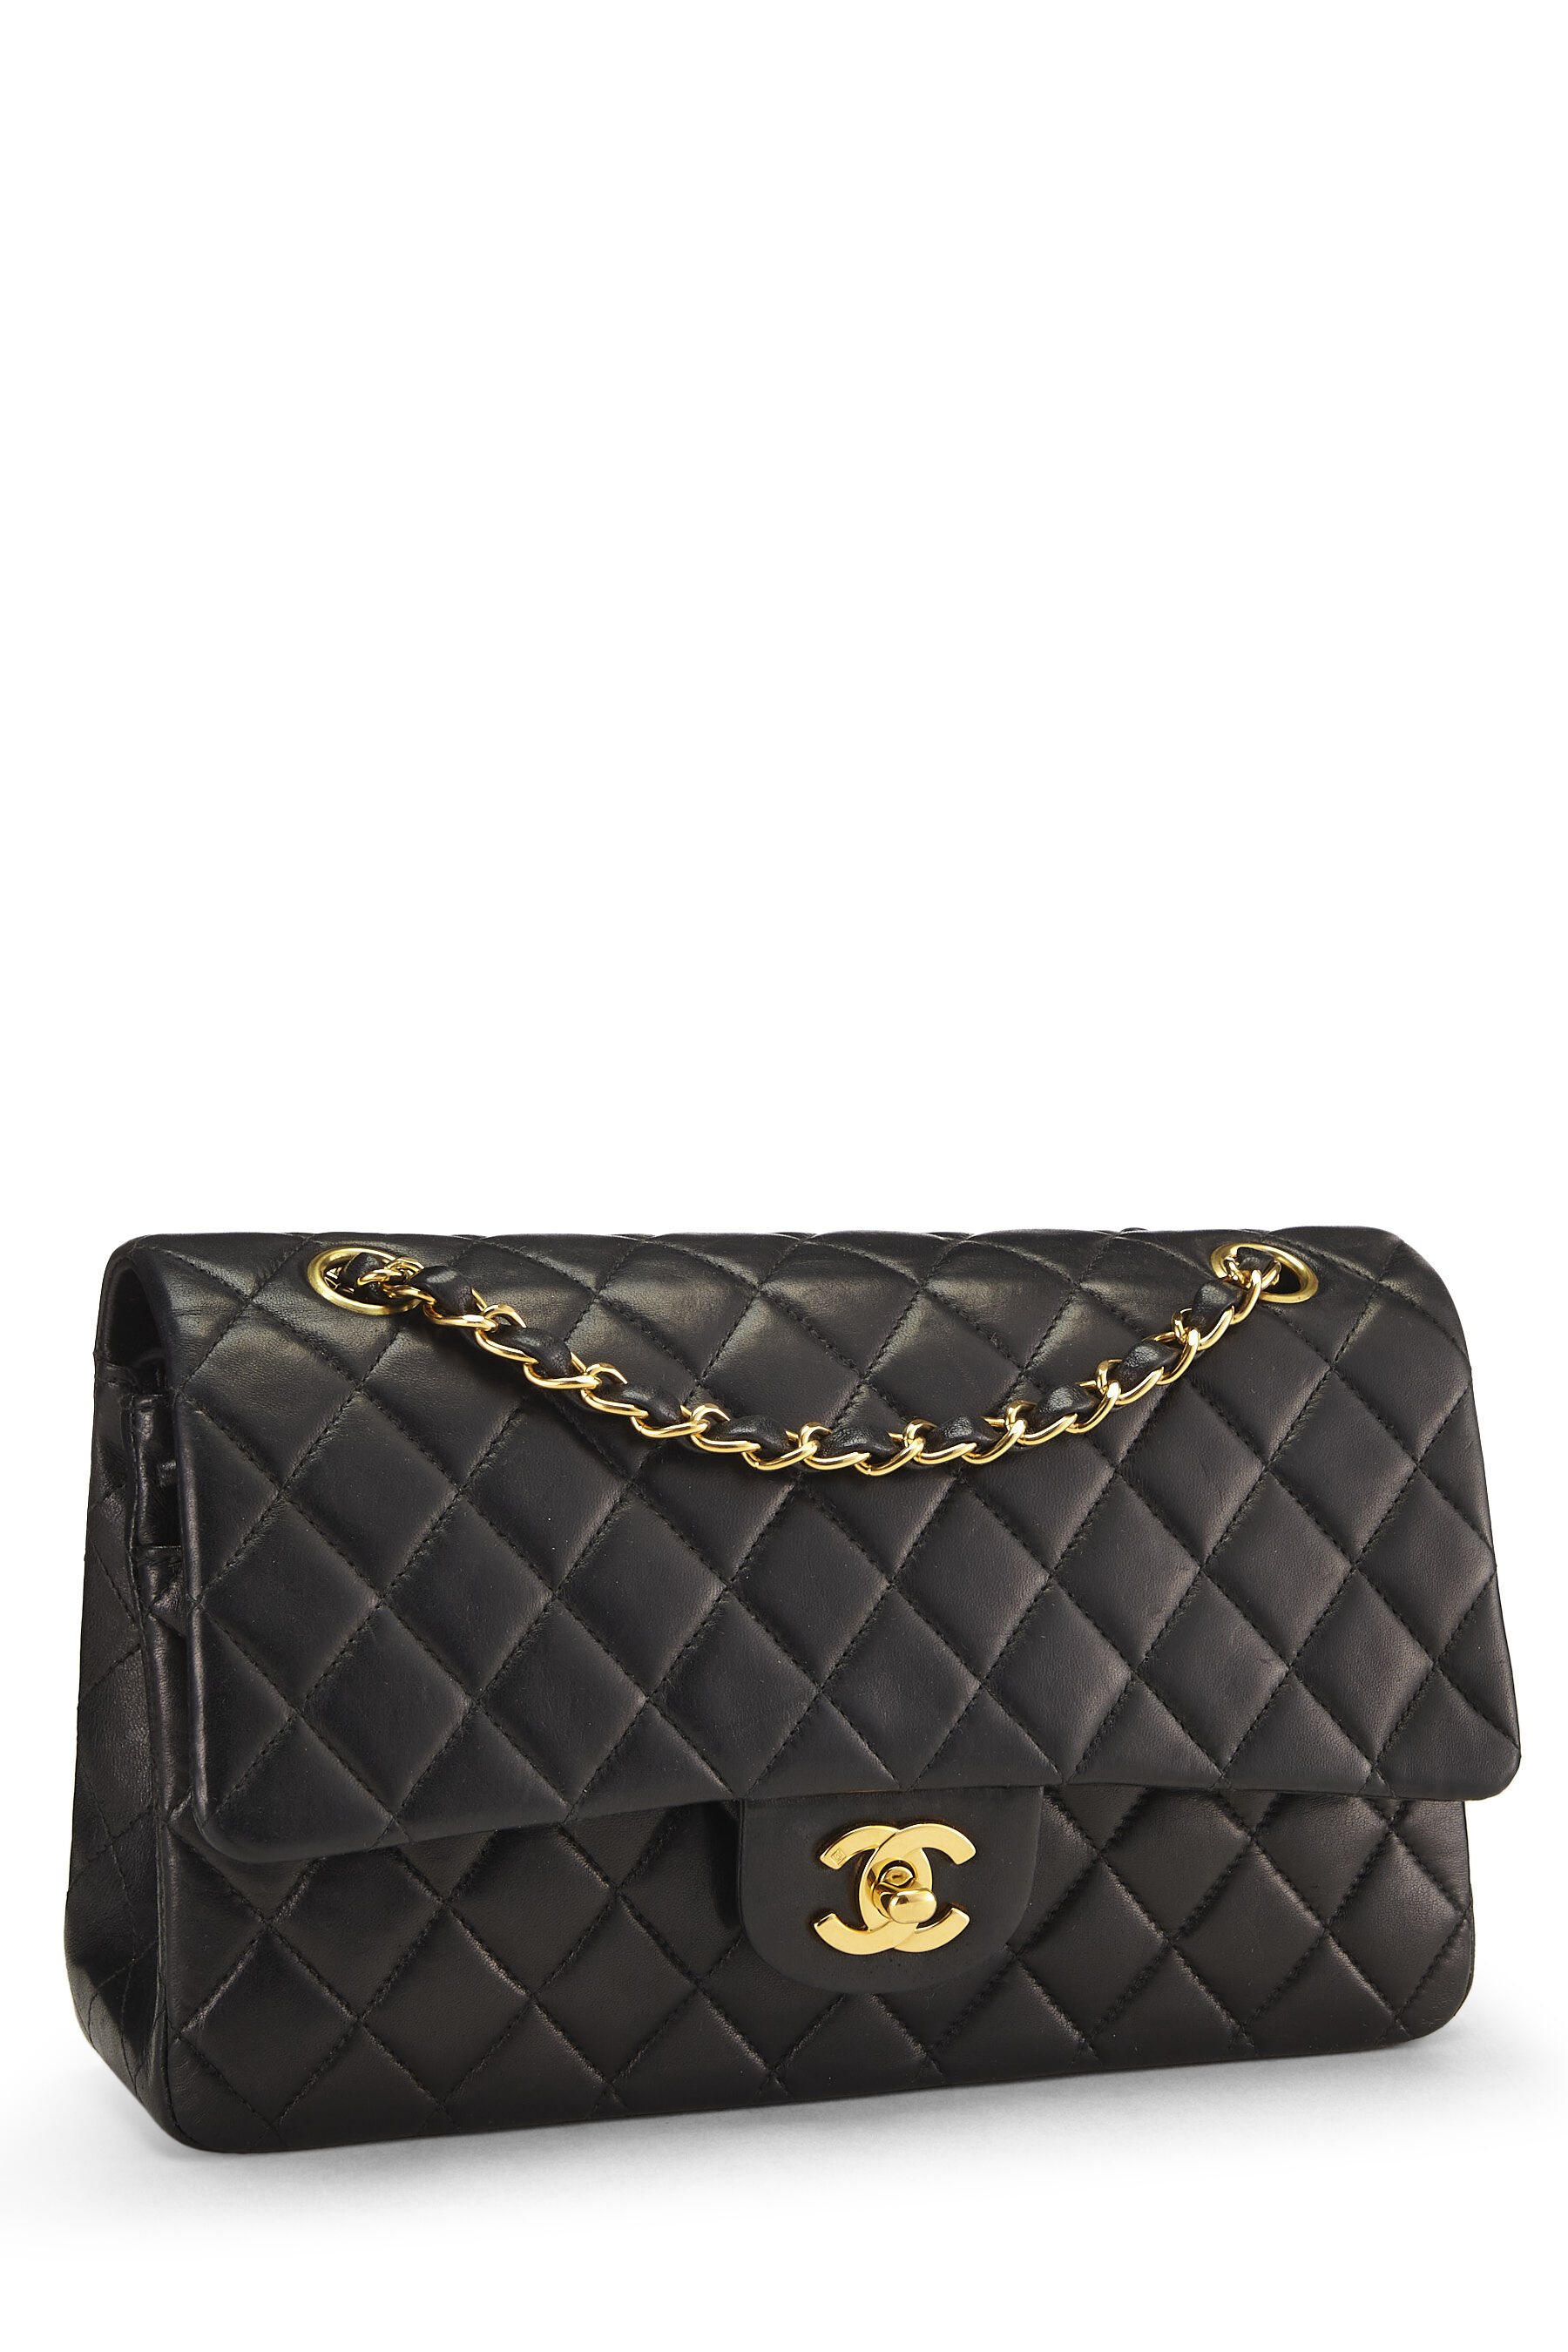 chanel classic black quilted handbag